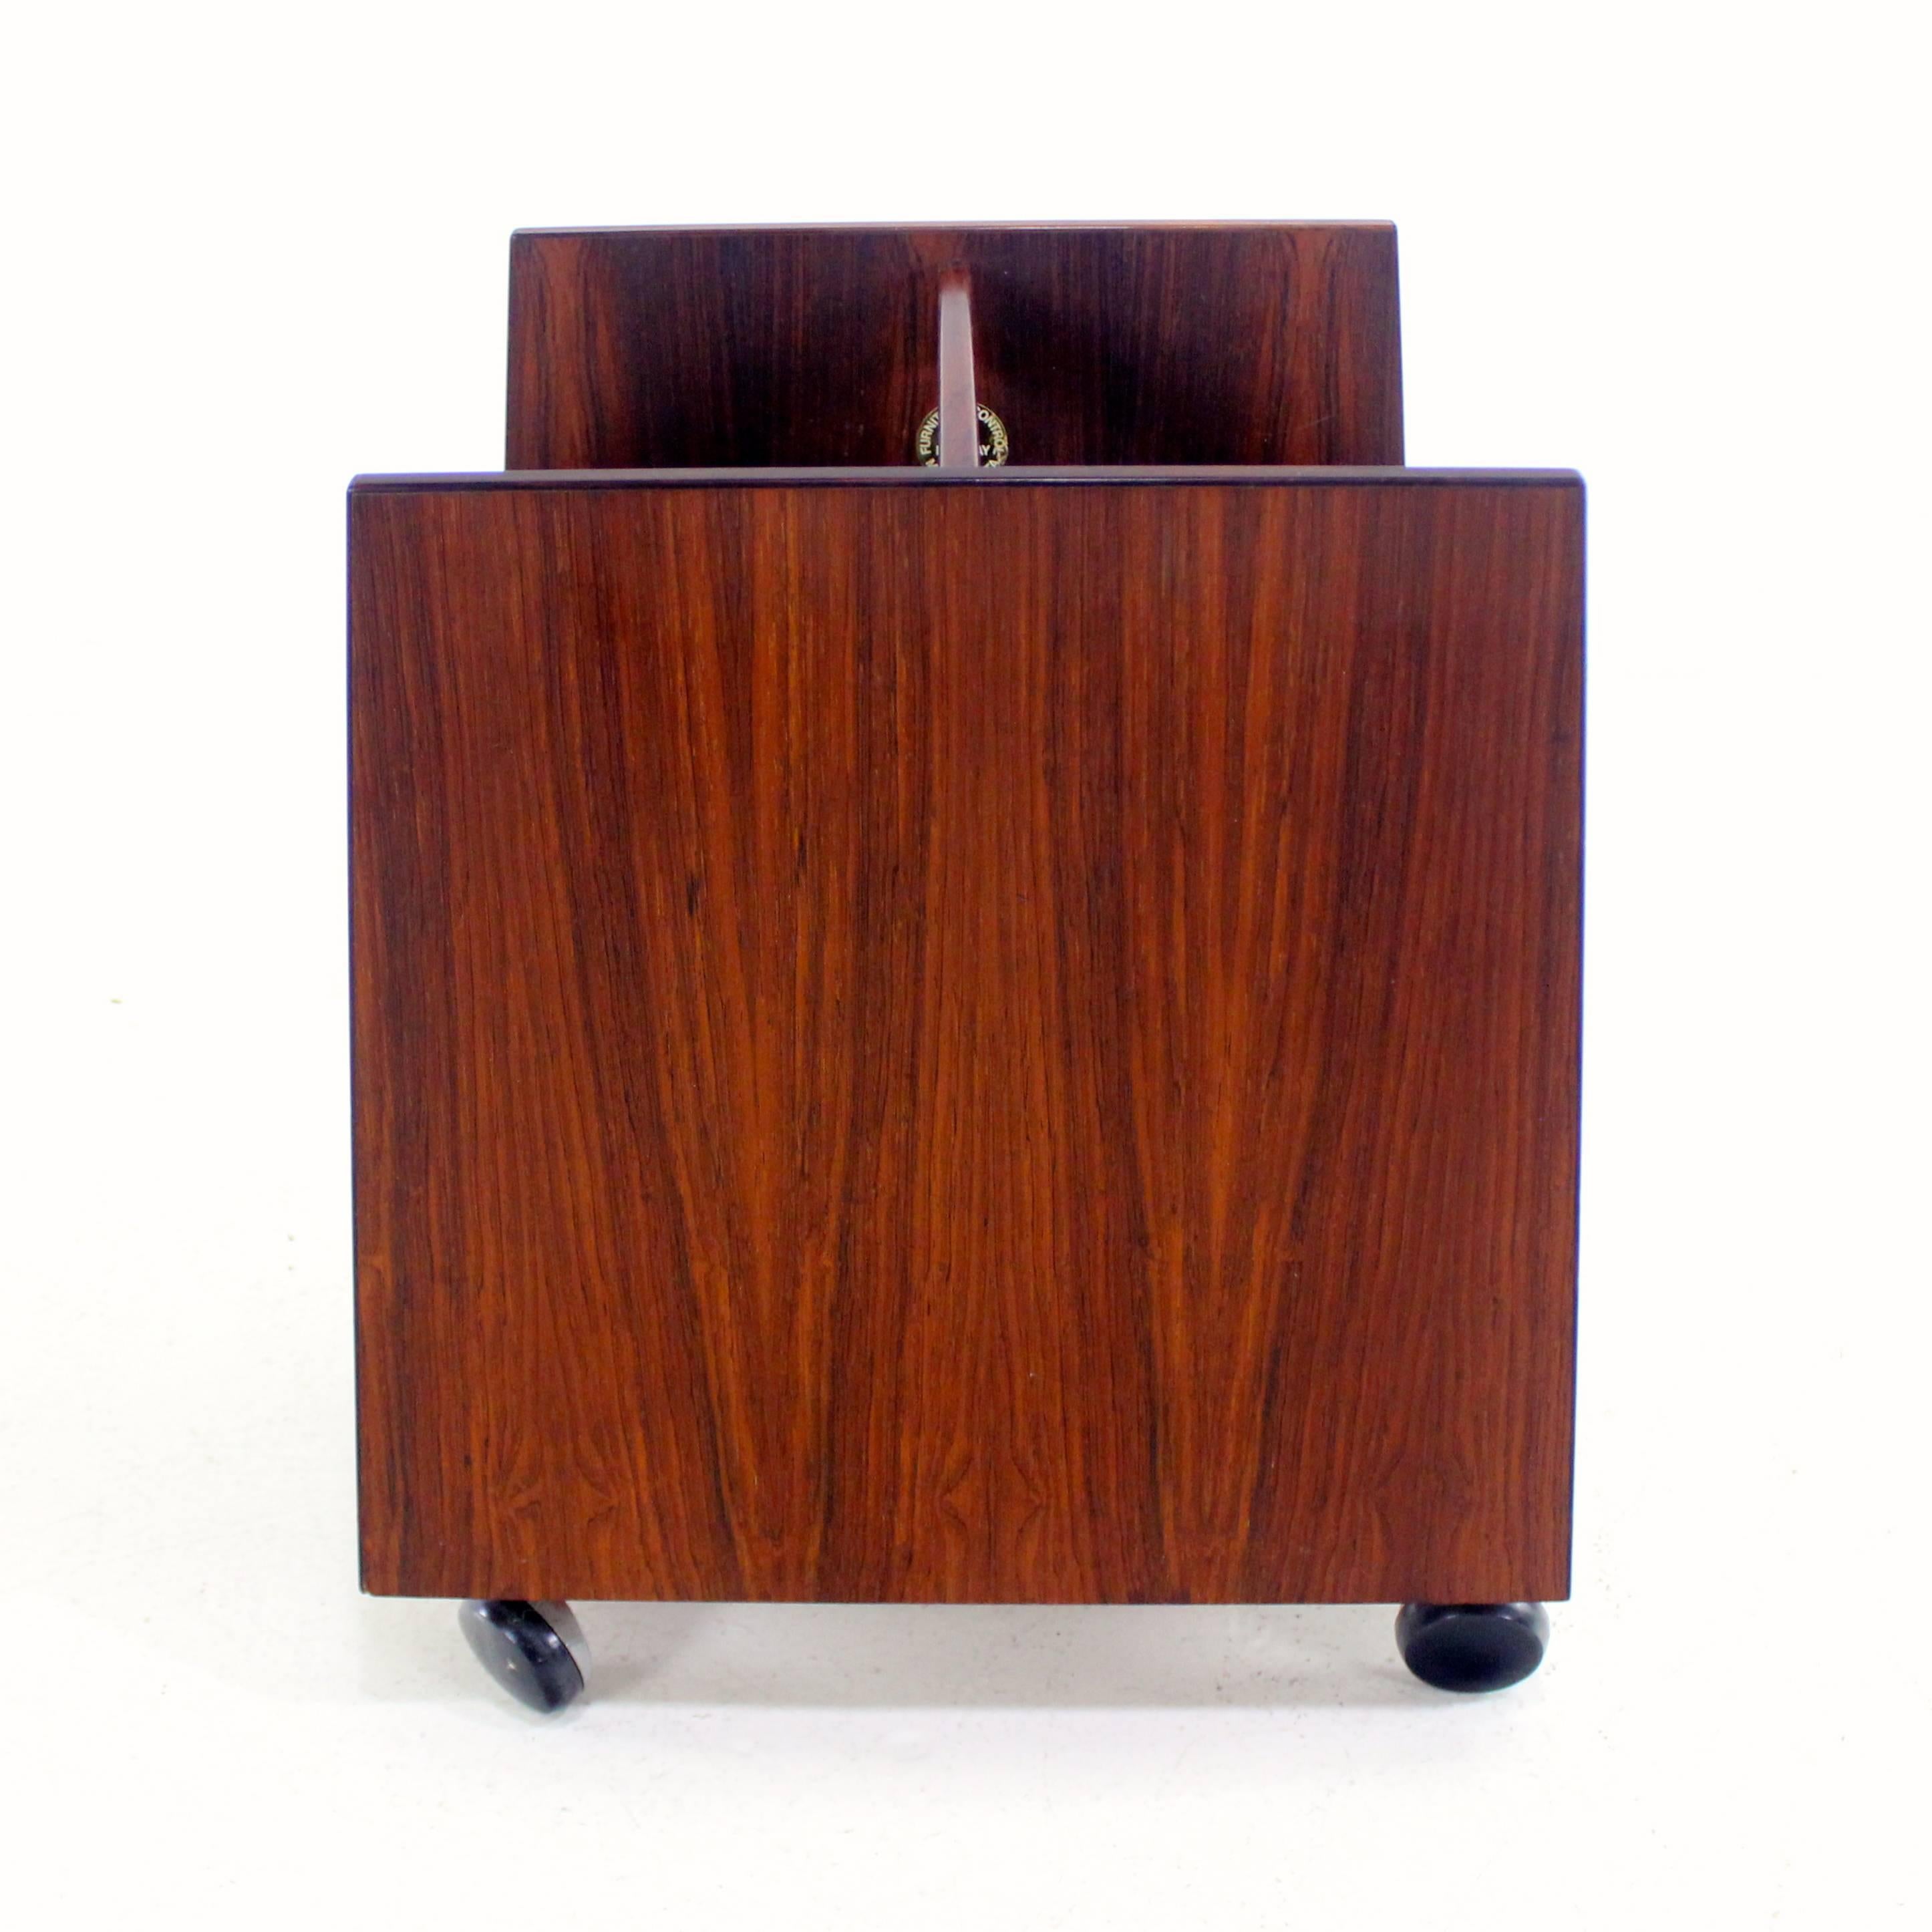 Scandinavian Modern Rosewood Media Trolley Designed by Rolf Hesland In Excellent Condition For Sale In Portland, OR